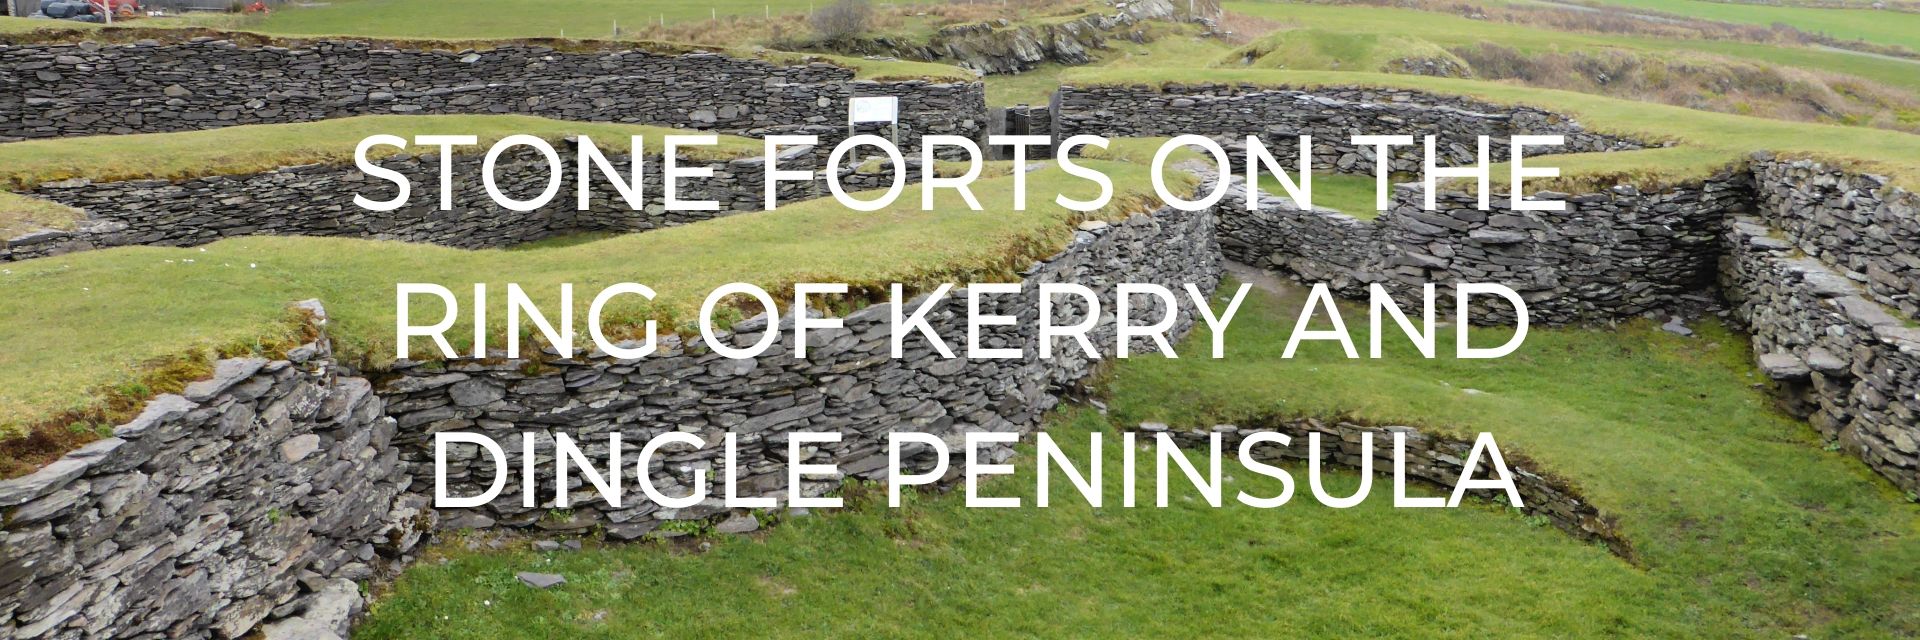 Stone Forts on the Ring of Kerry and Dingle Peninsula Desktop Header